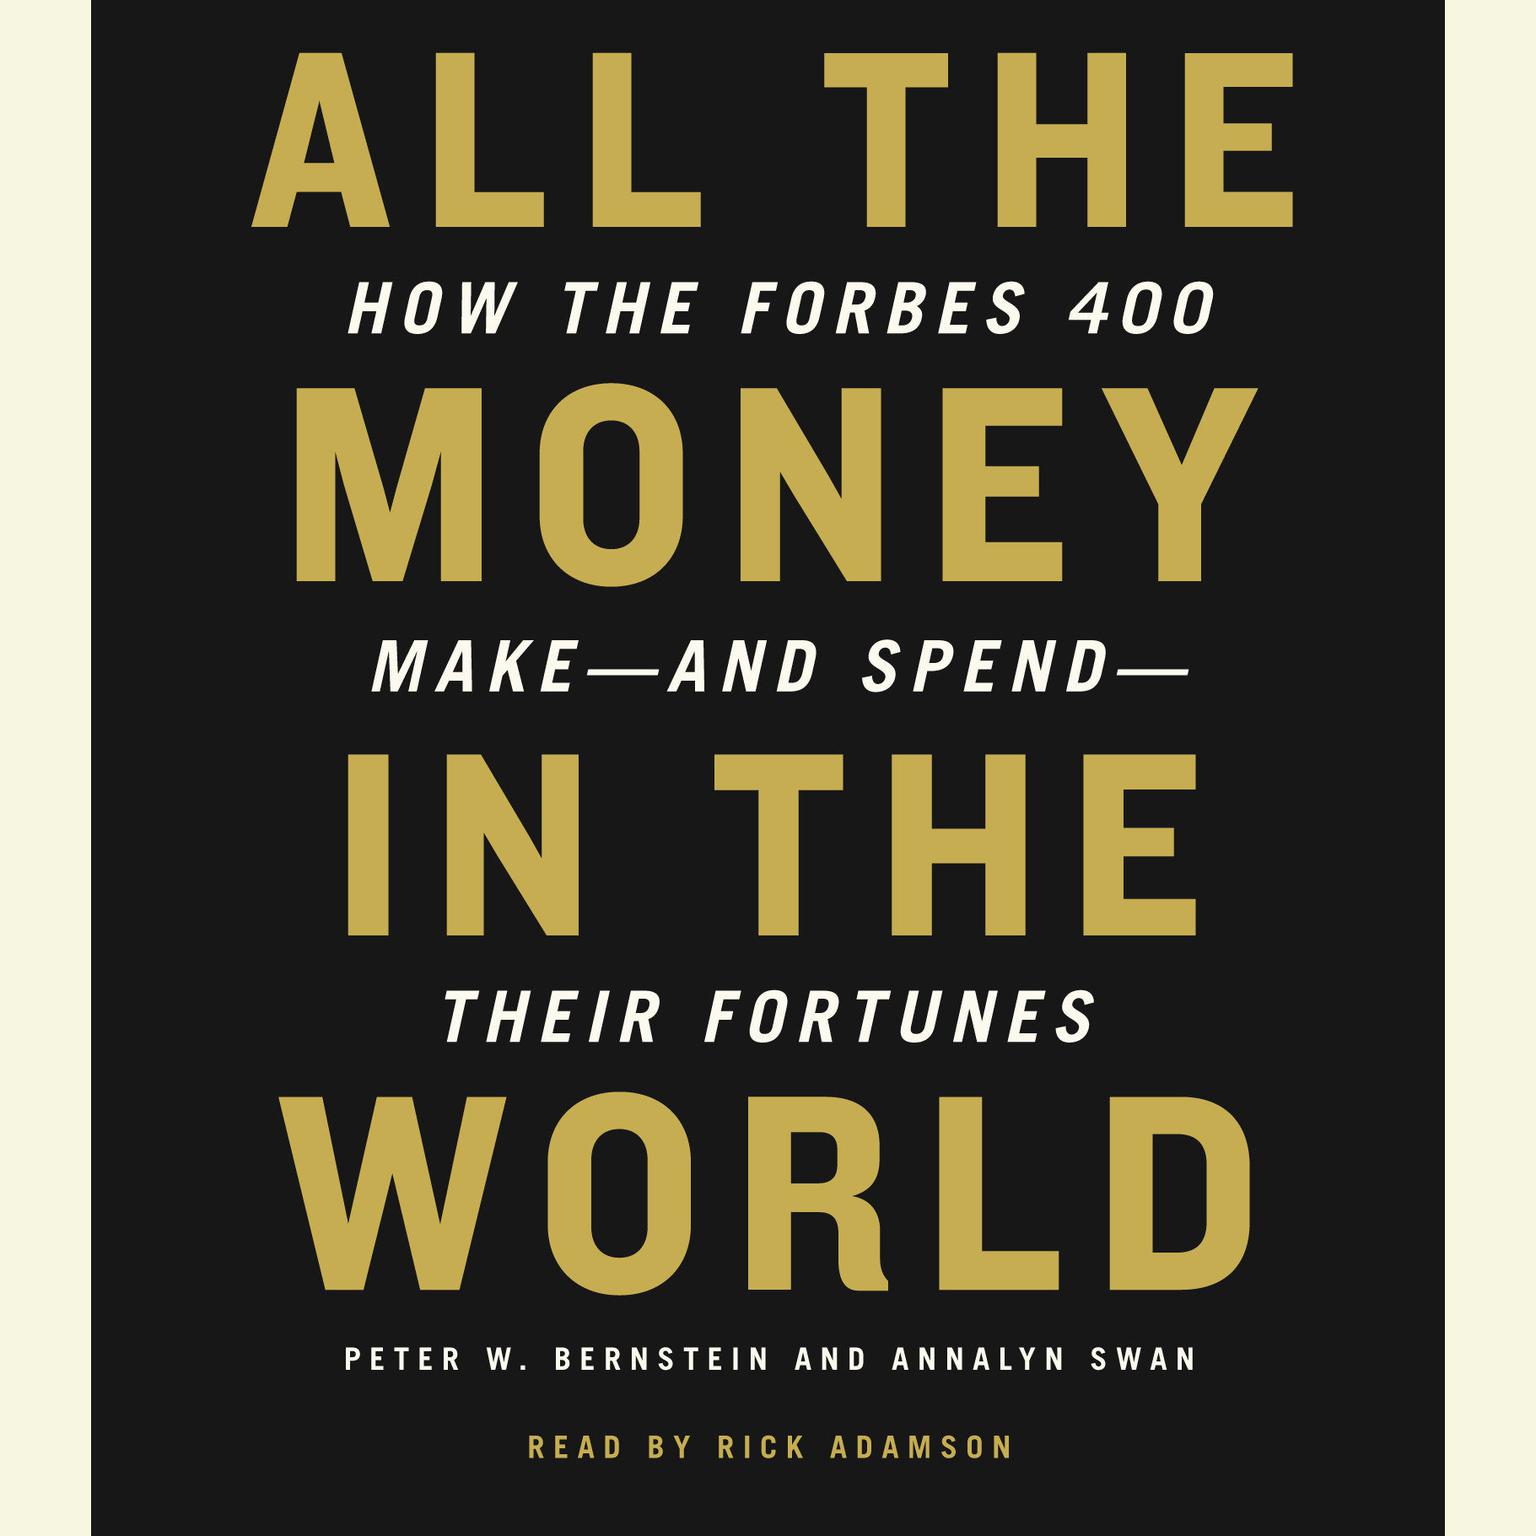 All the Money in the World (Abridged): How the Forbes 400 Make--and Spend--Their Fortunes Audiobook, by Peter W. Bernstein